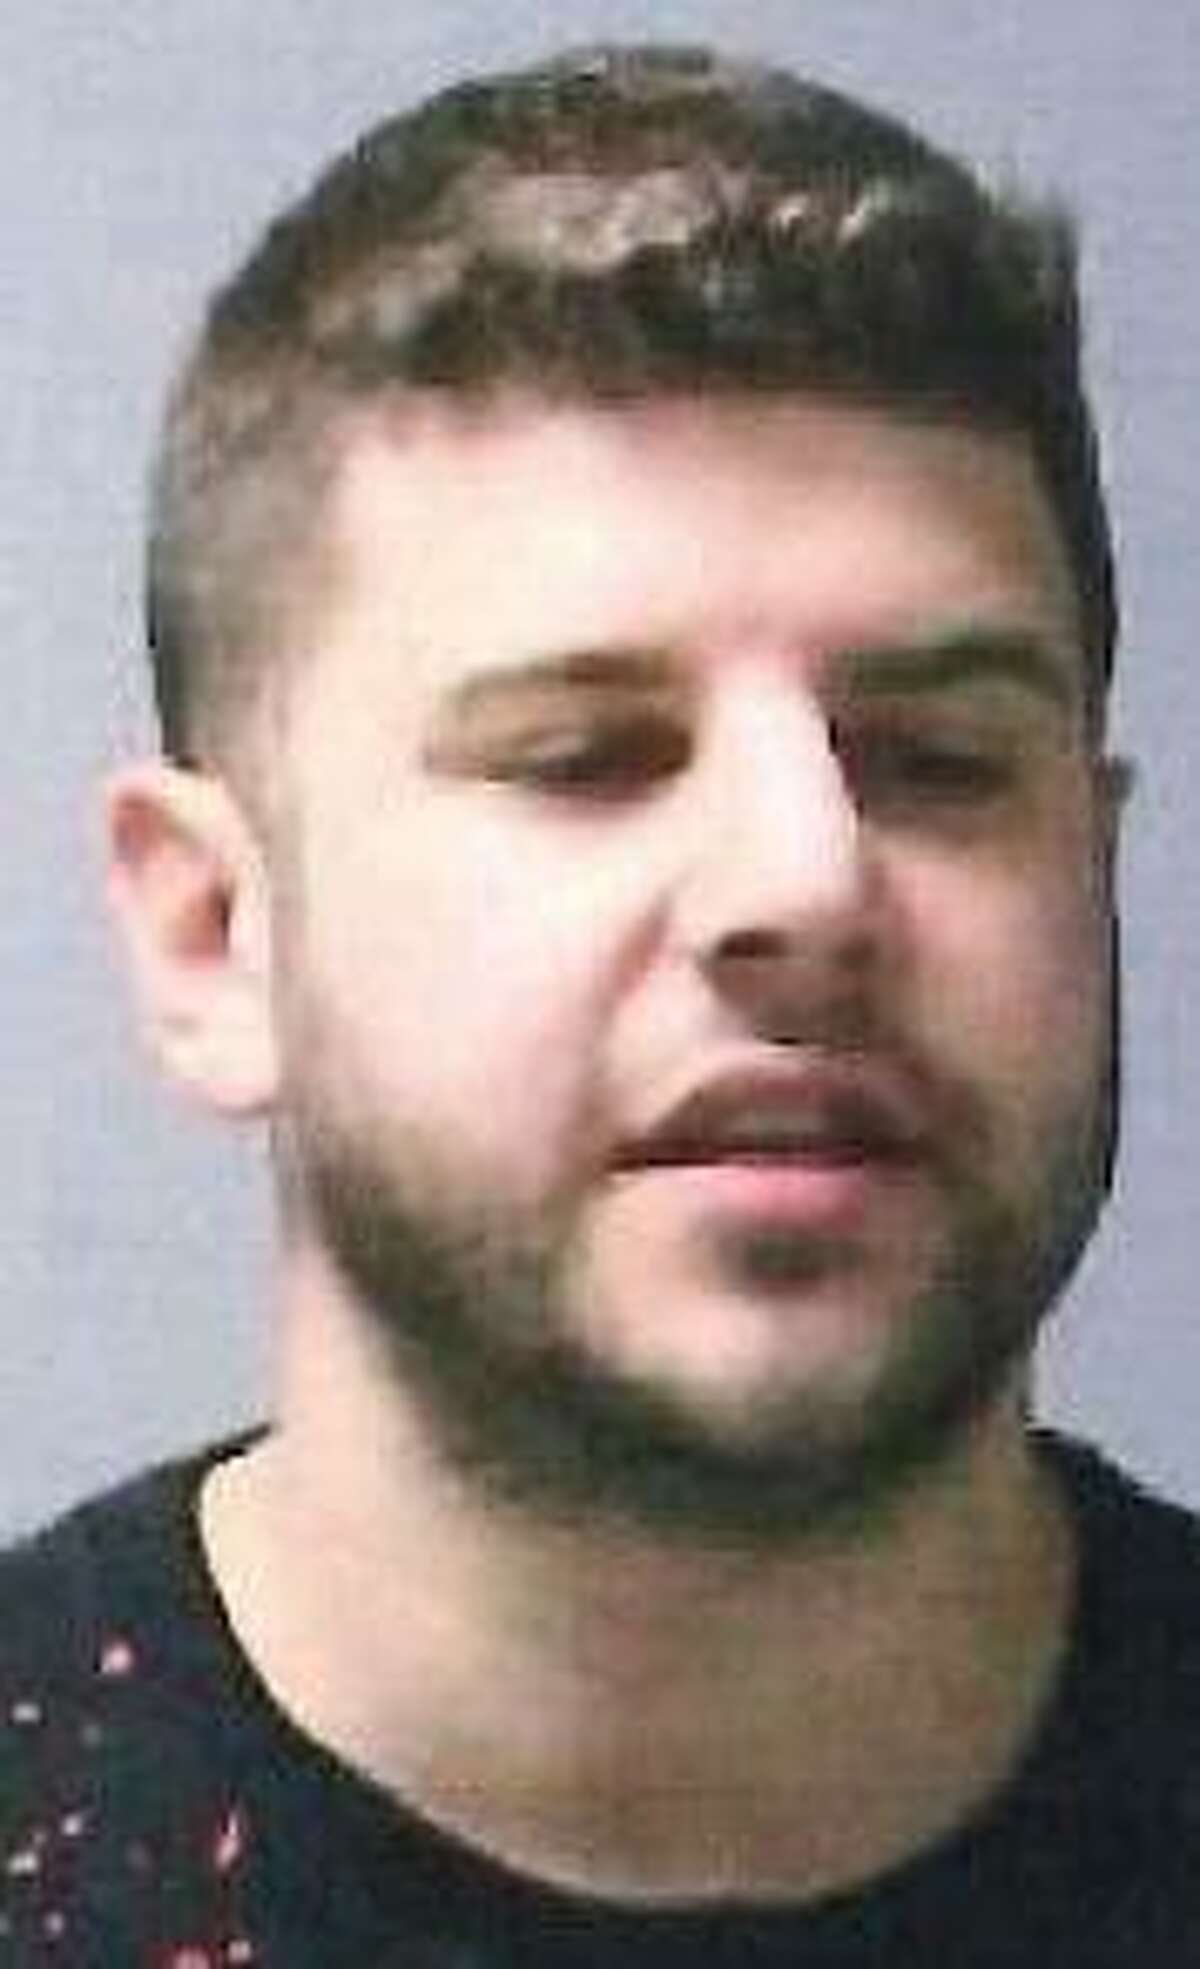 Anthony Diorio, 31, of Rockridge Terrace in Prospect, has been arrested on charges of intimidation based on bigotry/bias, interfering with police, breach of peace and threatening. State Police say he was one of two men who used ethic slurs and vulgar comments director to an airport patron and their family at Bradley International Airport on Thursday, Oct. 27, 2016.